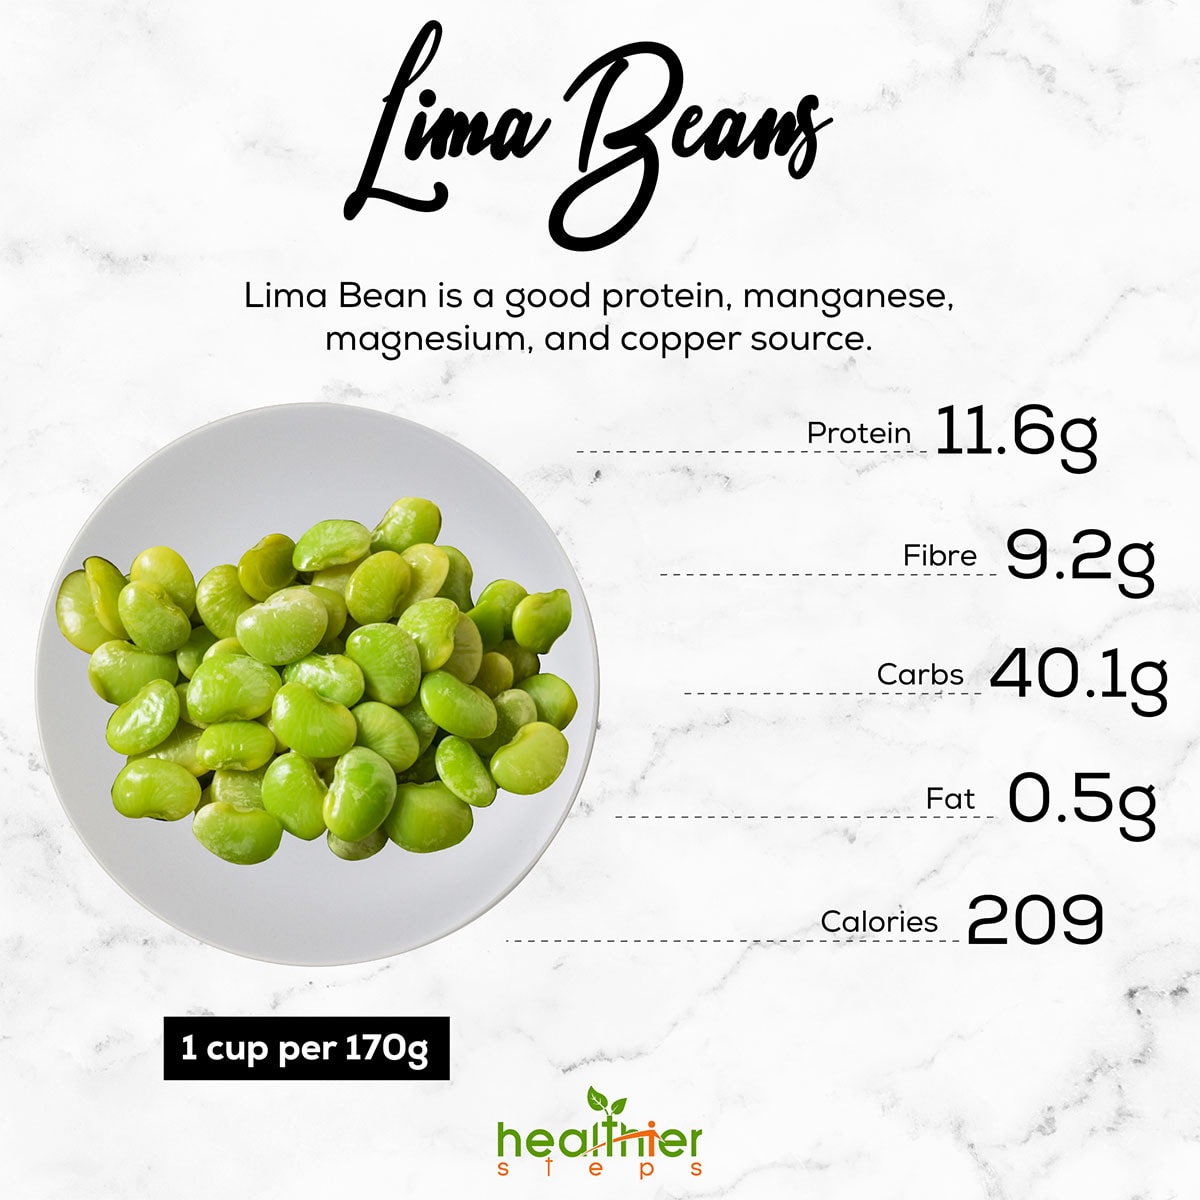 Are Lima Beans Good For You?